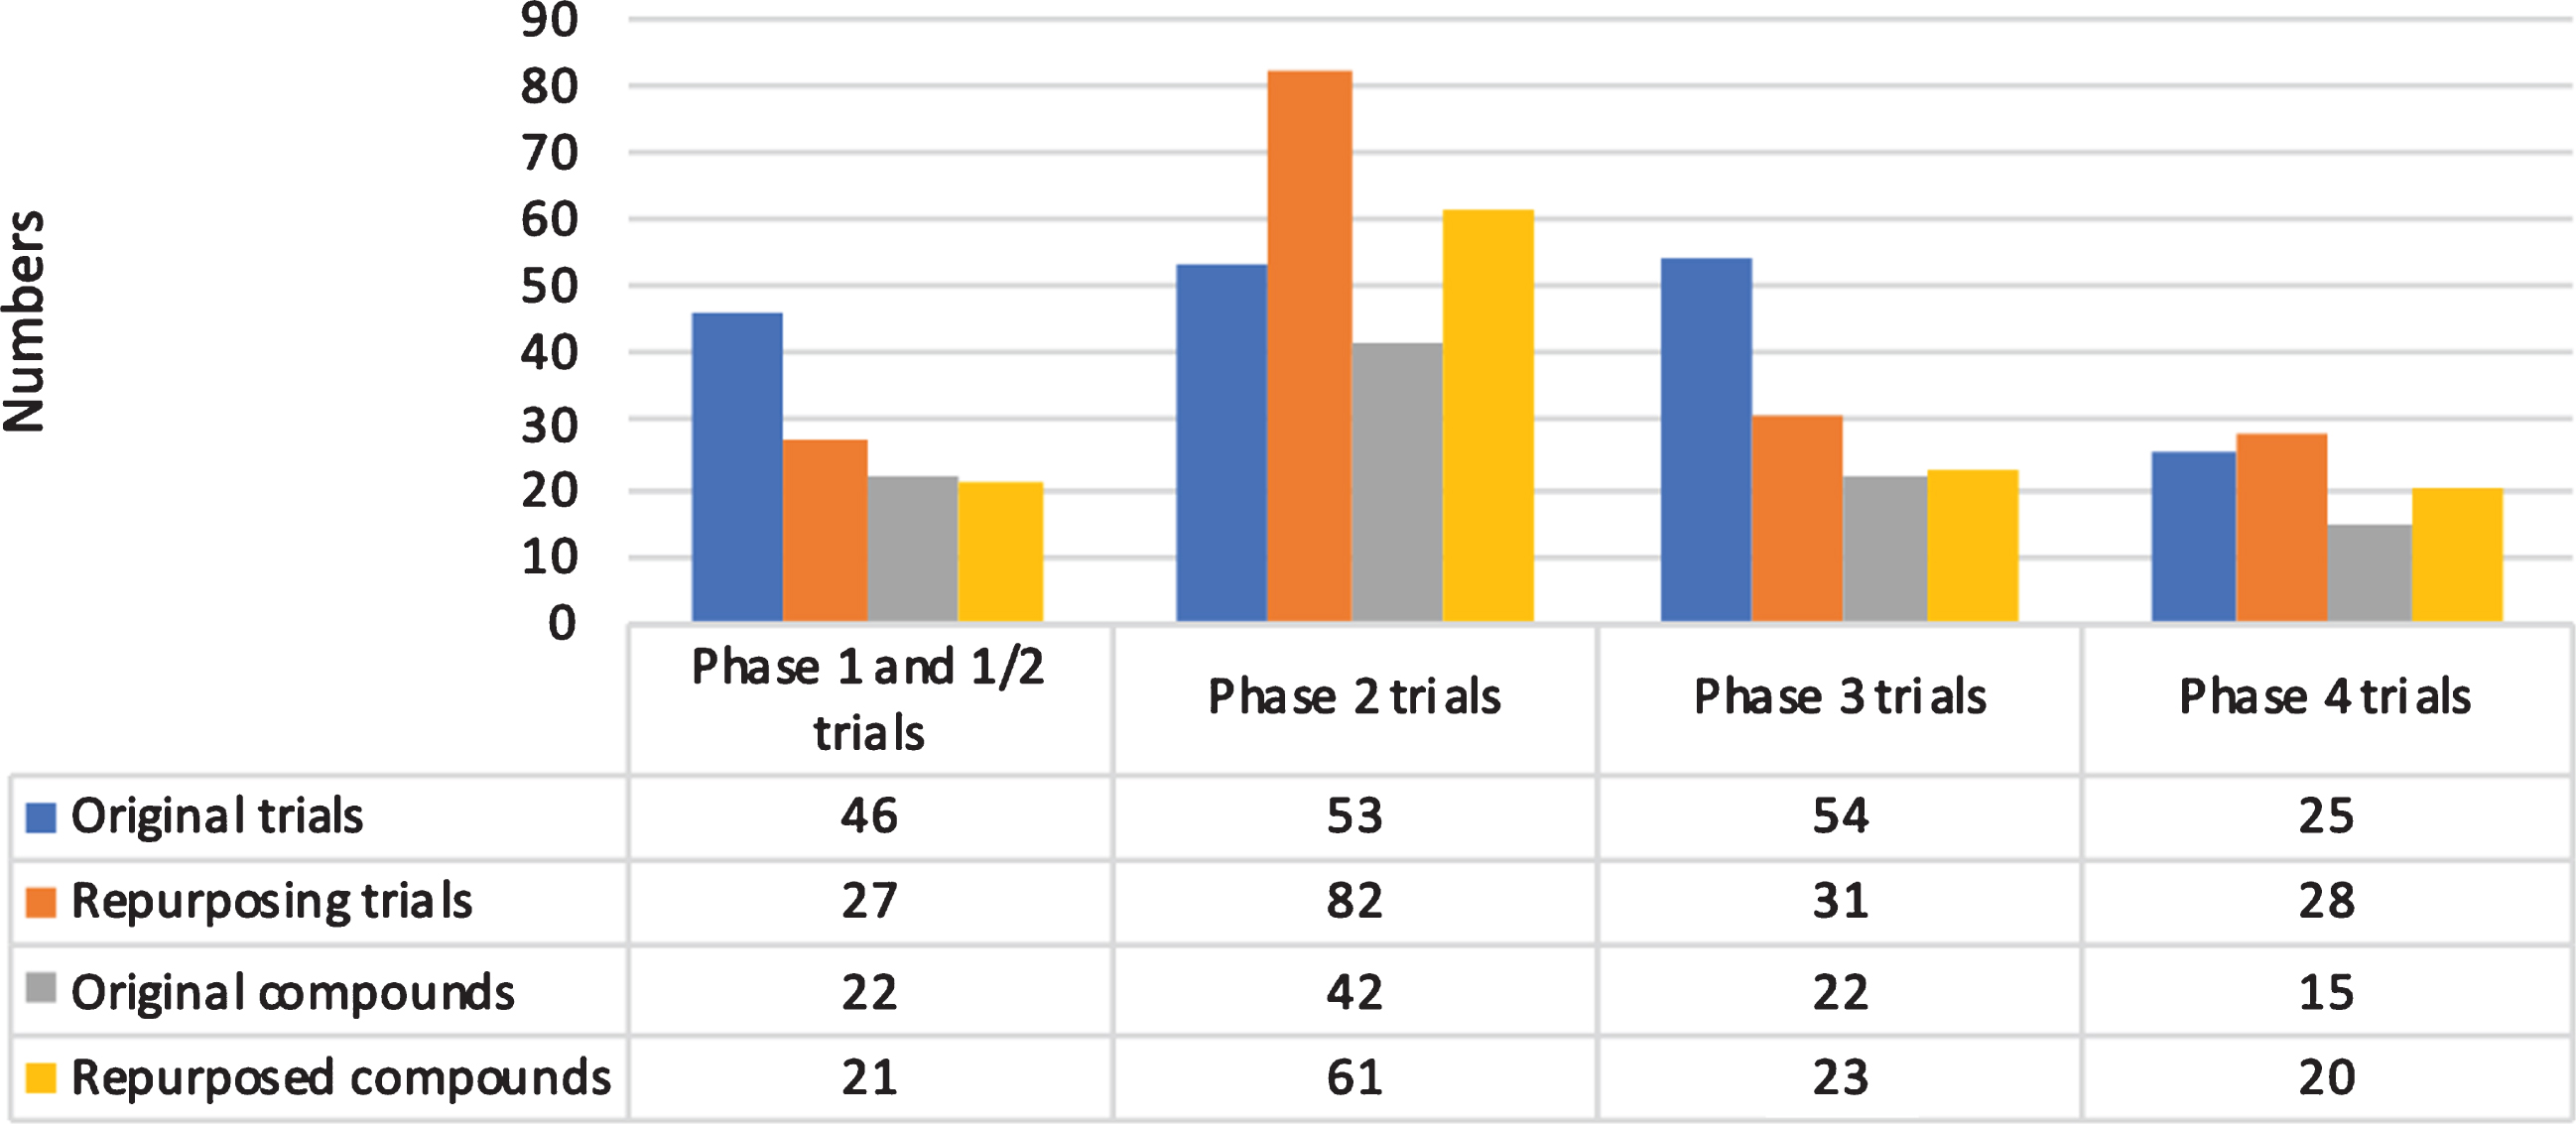 Overview of trials and compounds by phase.